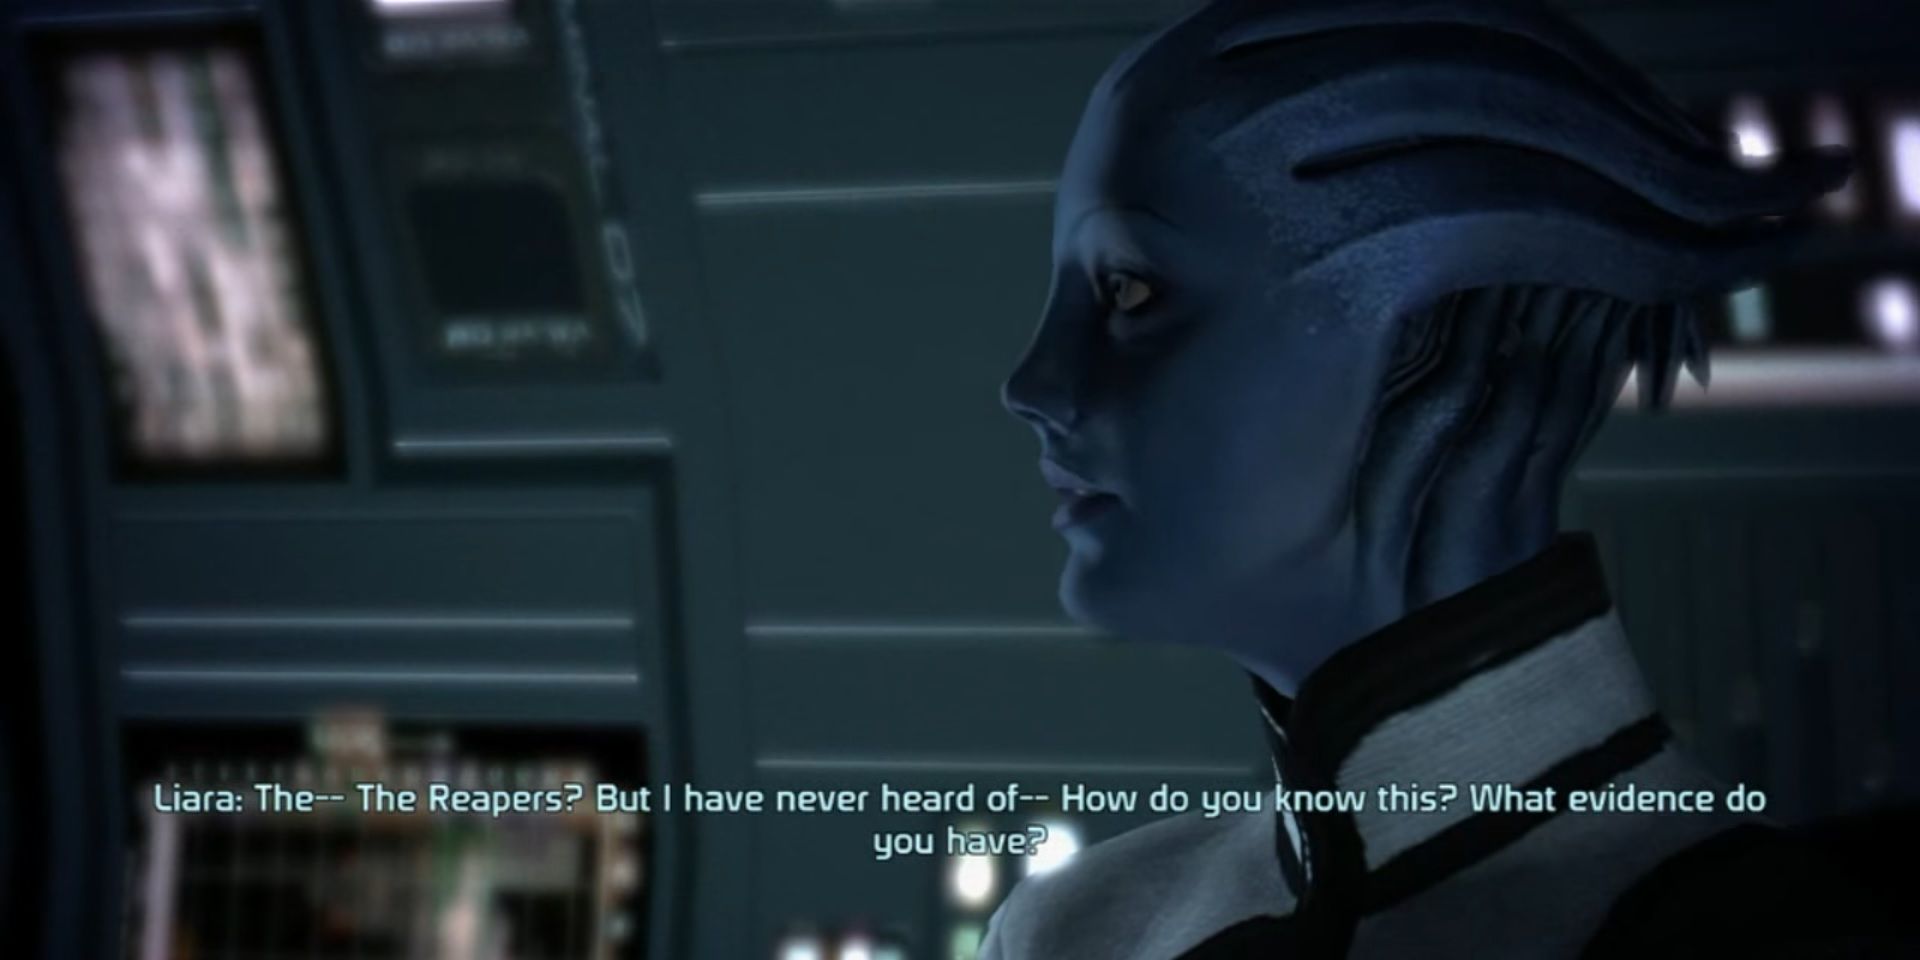 Mass Effect - Liara has never heard of the reapers